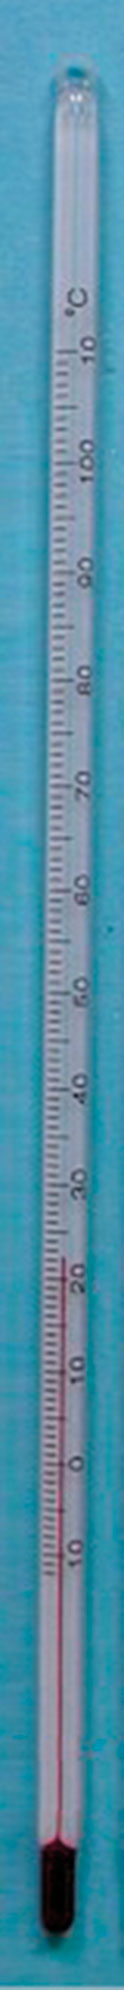 Thermometers, rod scale, general purpose, basic quality, full immersion